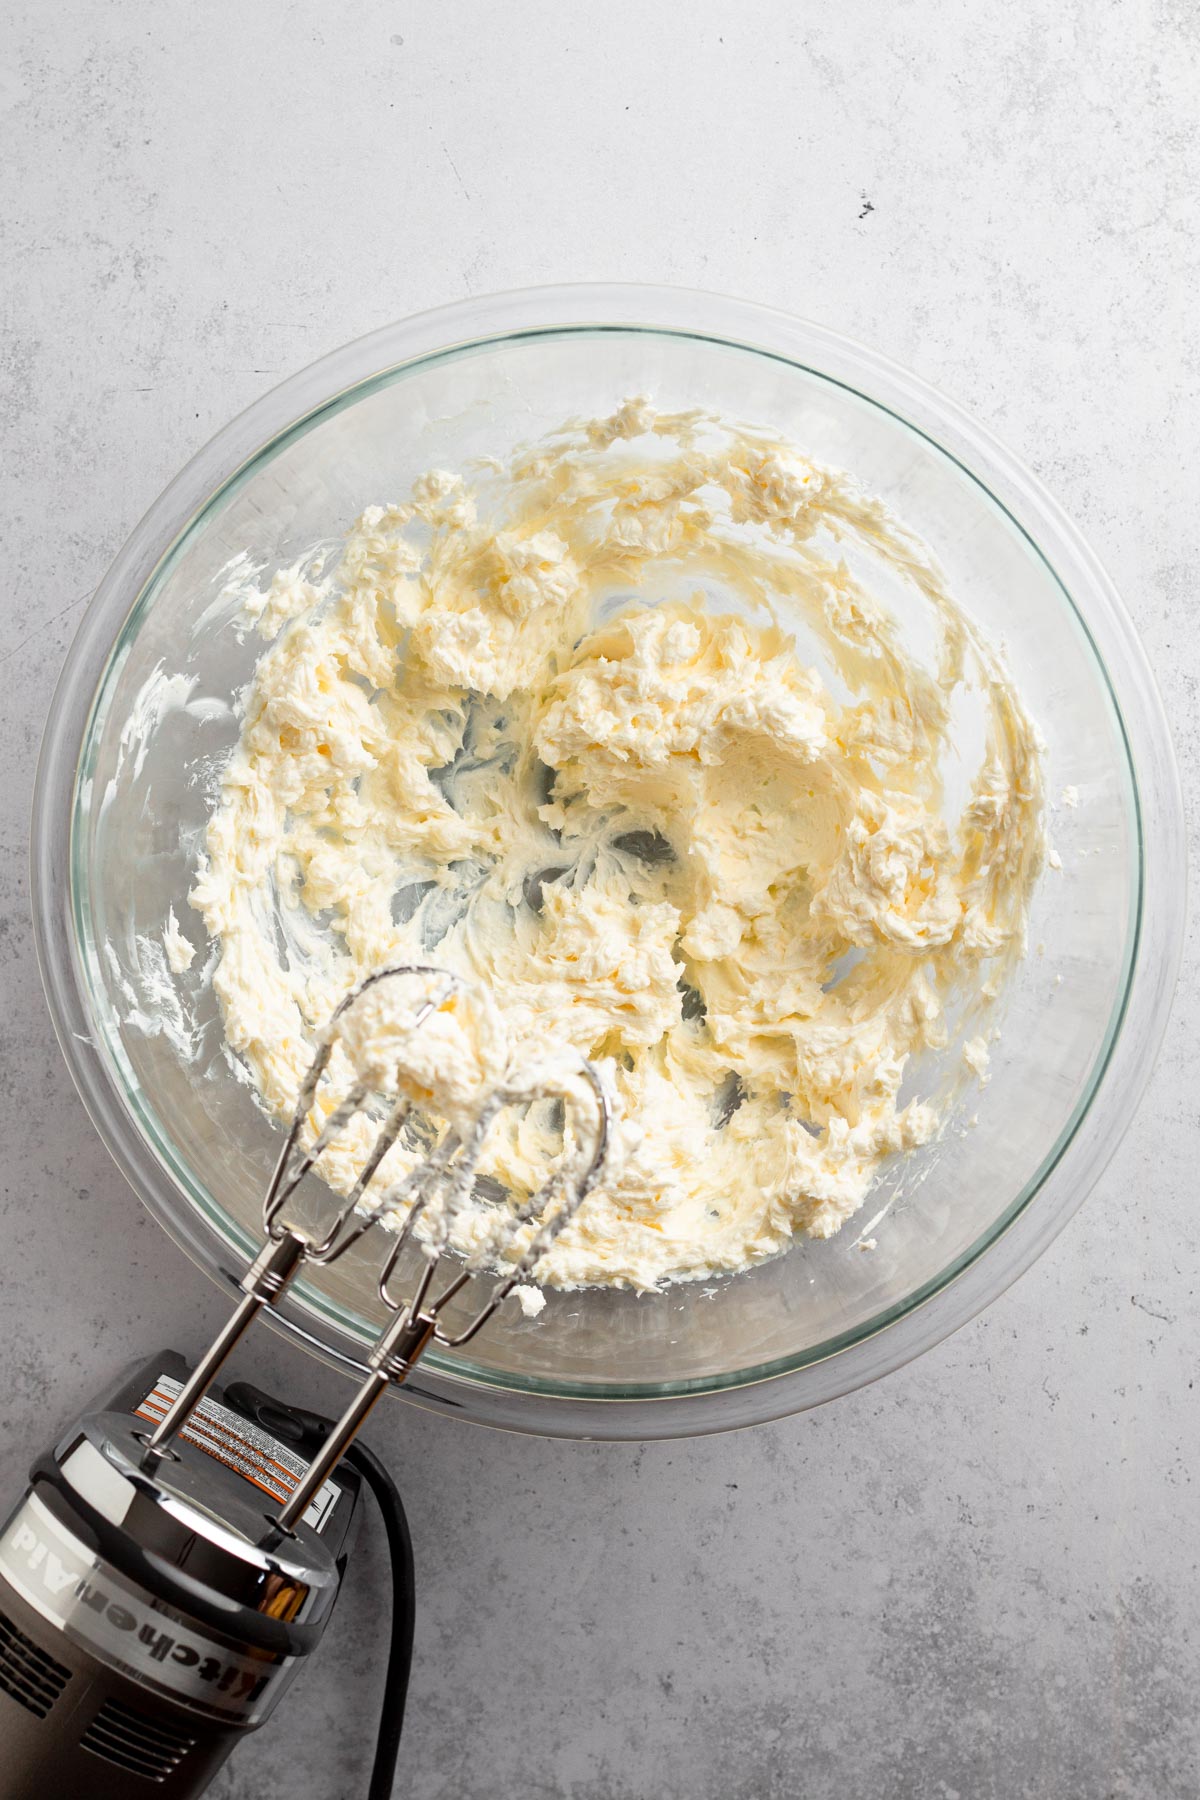 Butter and cream cheese beaten together in a glass mixing bowl on a gray surface.